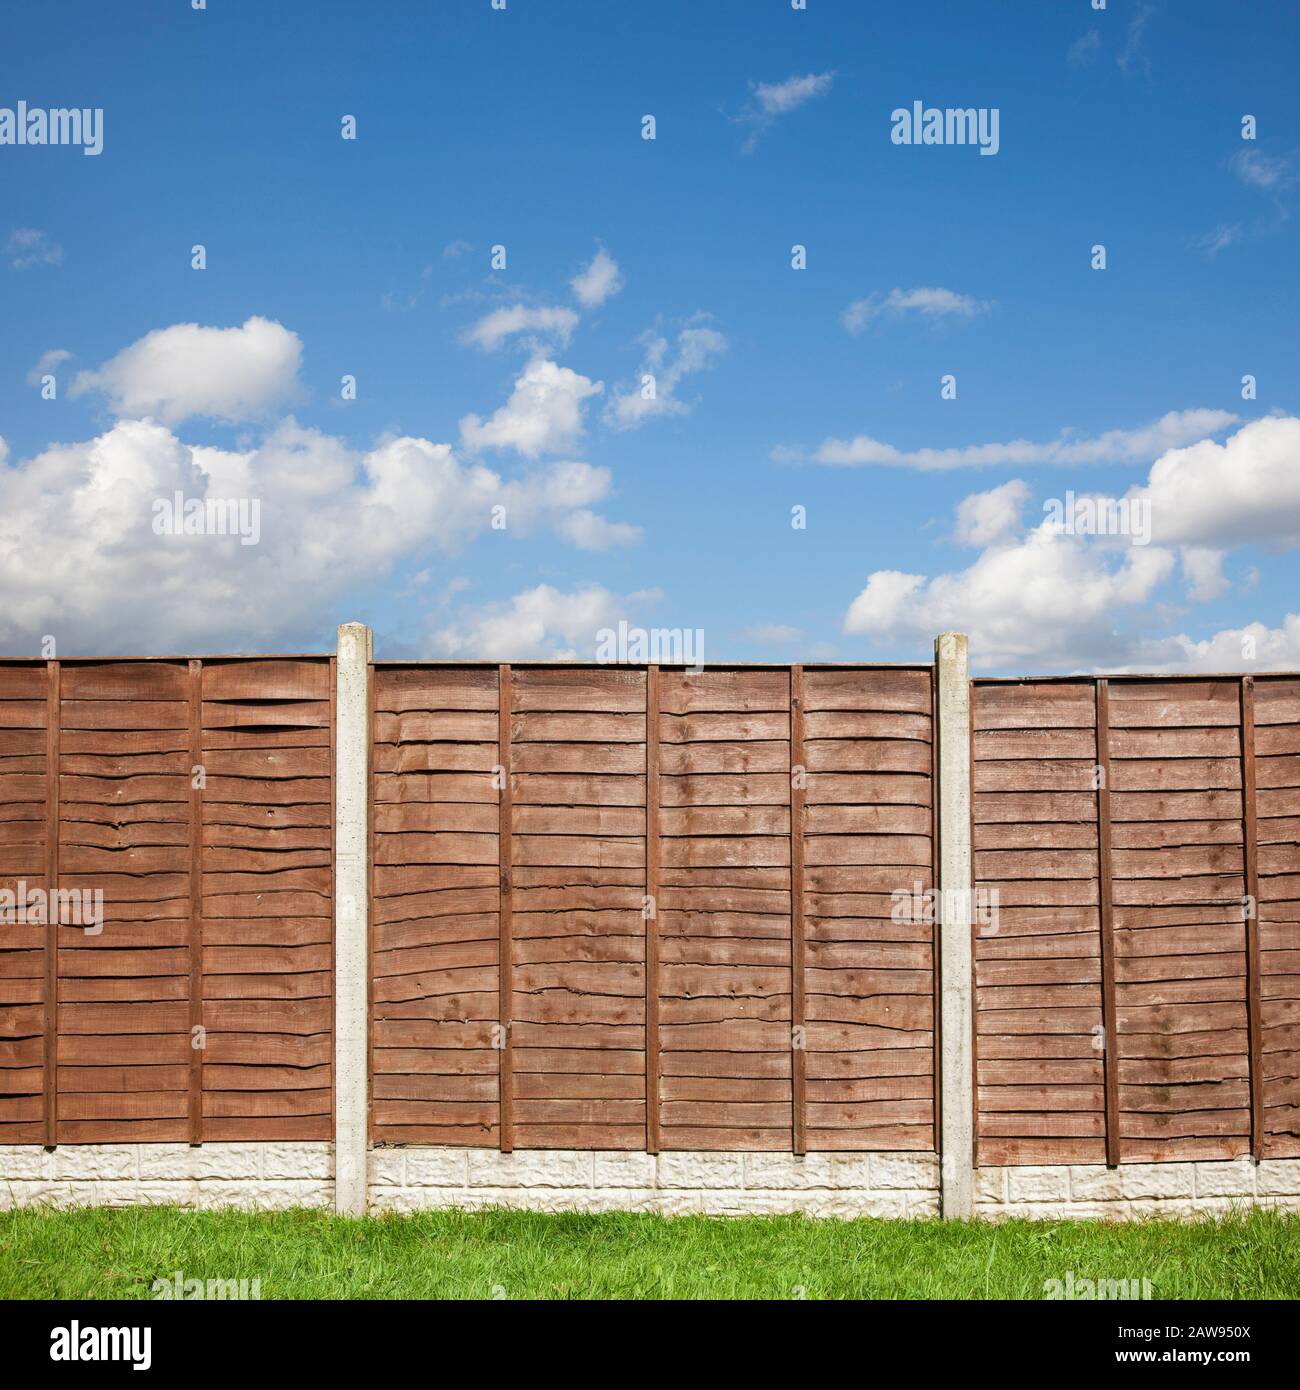 Brown wooden garden fence panels with a blue sky above Stock Photo